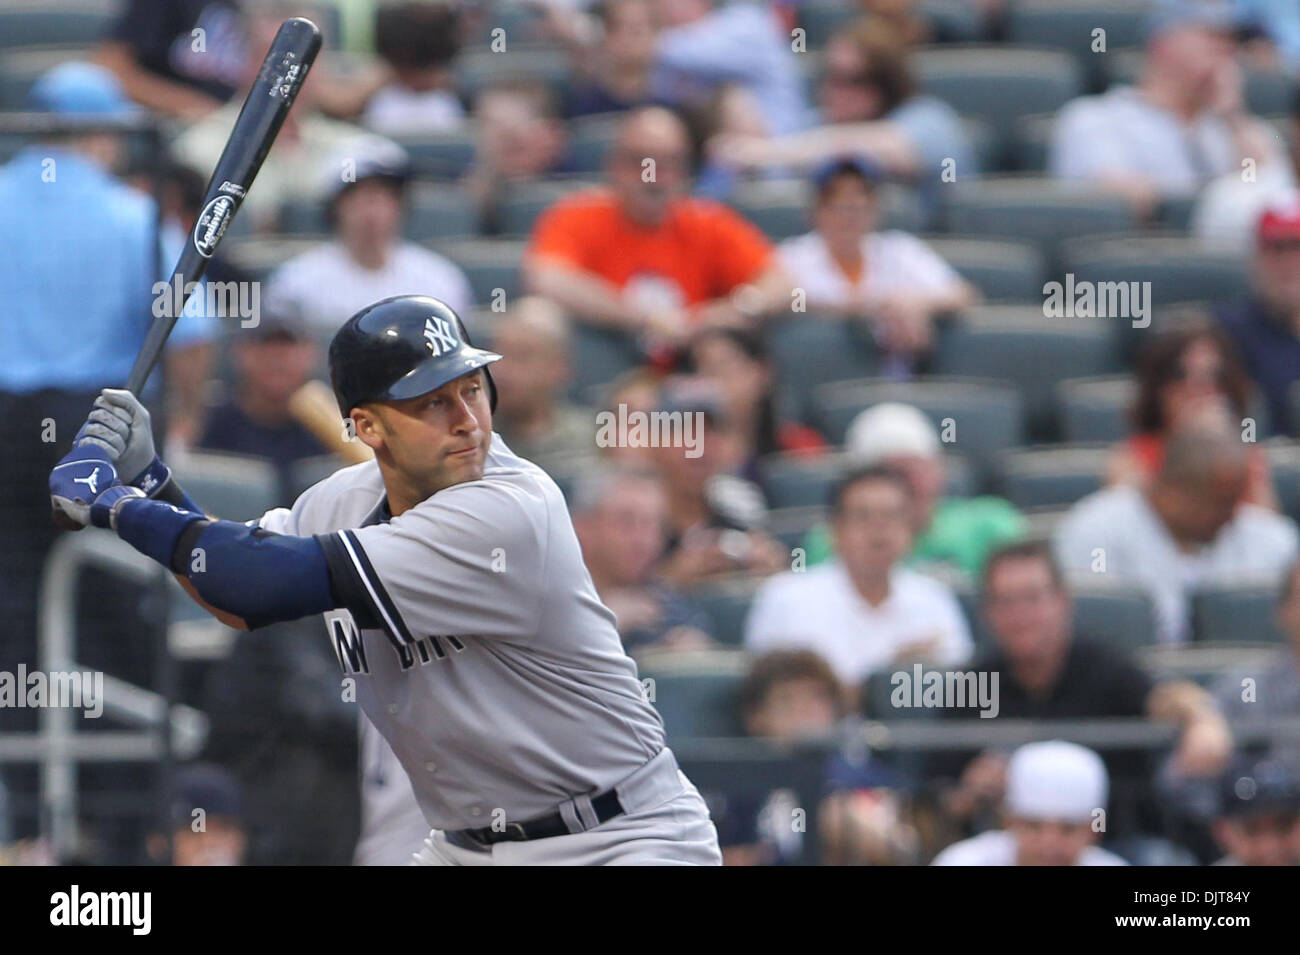 New York Yankees Infielder Derek Jeter  (#2) at bat. The Yankees defeated the Mets 2-1in the game played at Citi fied in Flushing, New York. (Credit Image: © Anthony Gruppuso/Southcreek Global/ZUMApress.com) Stock Photo